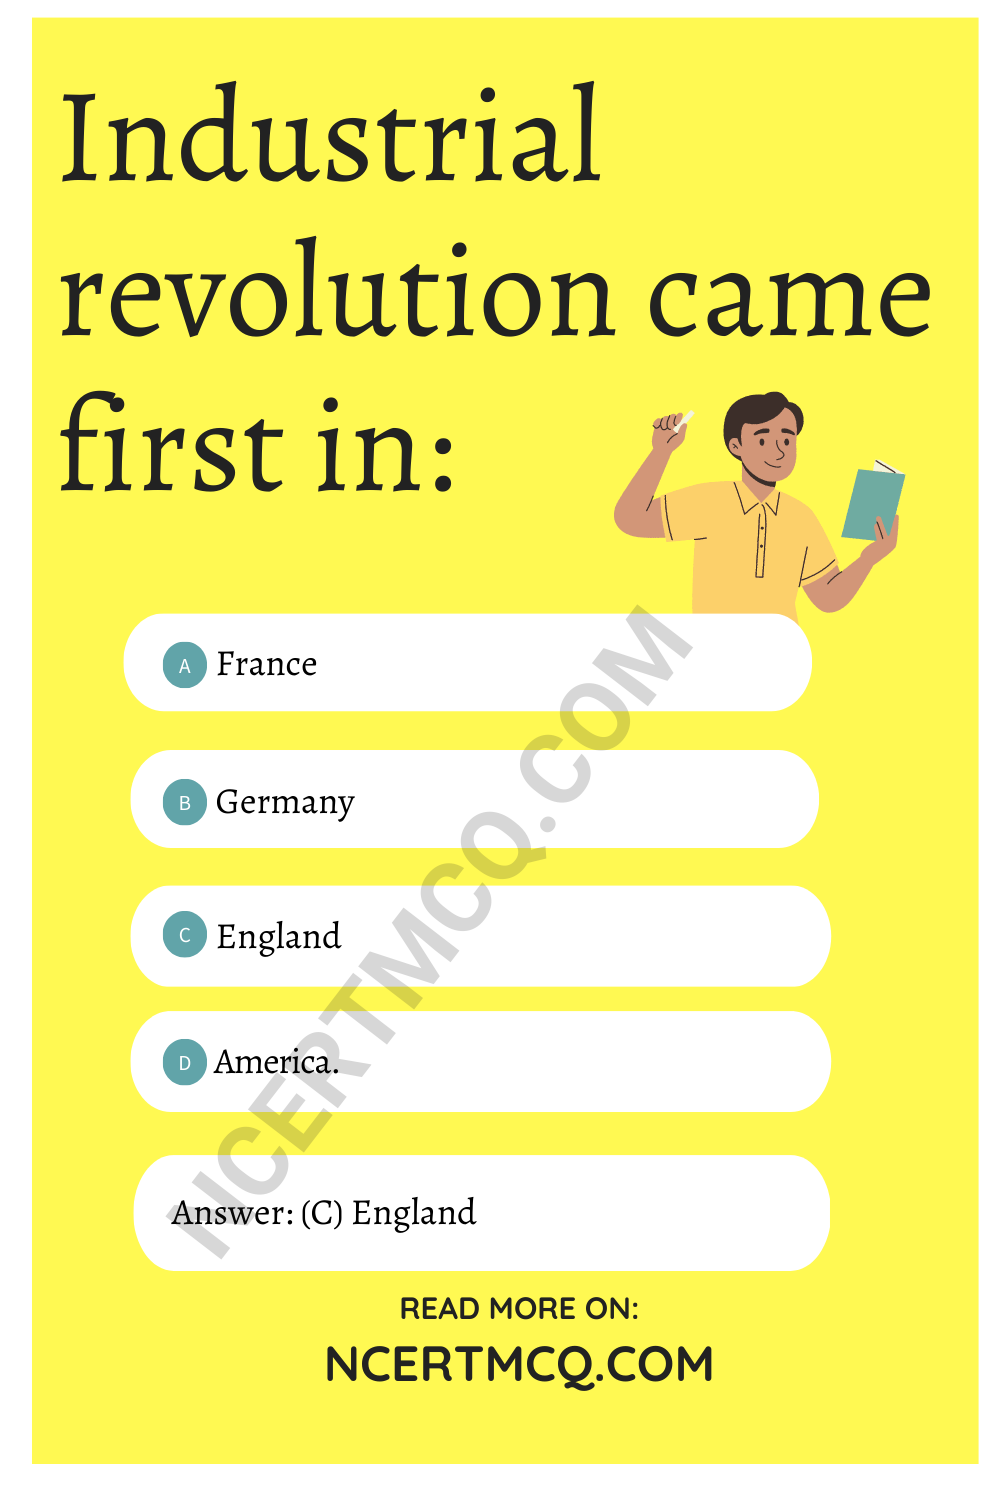 Industrial revolution came first in: